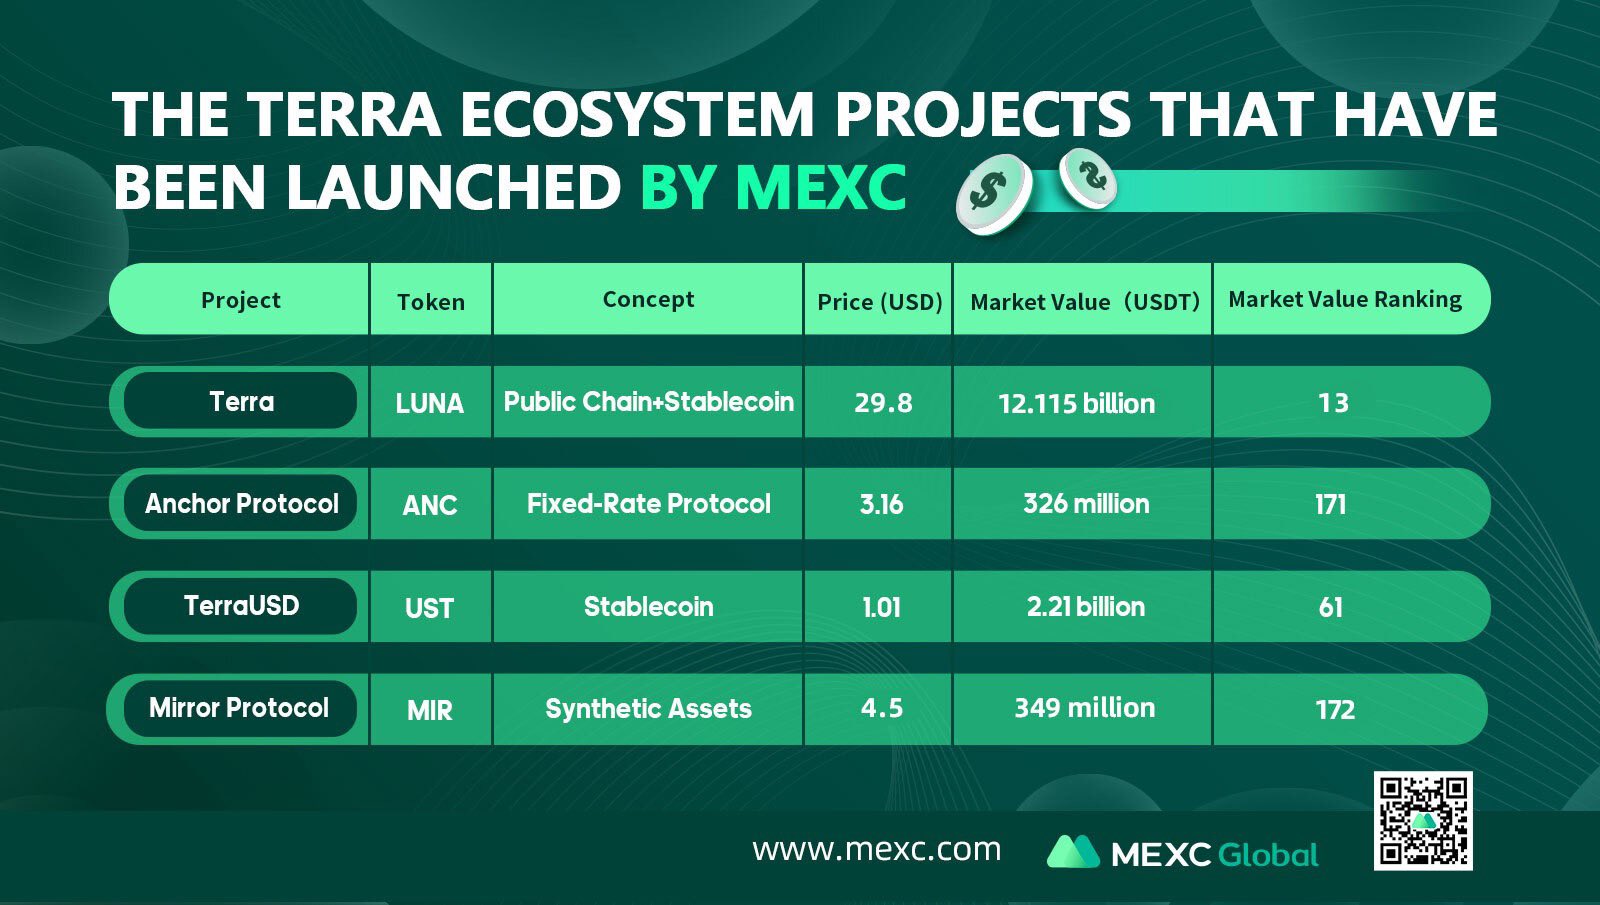 MEXC Global on Twitter: "Check out the #Terra ecosystem ...